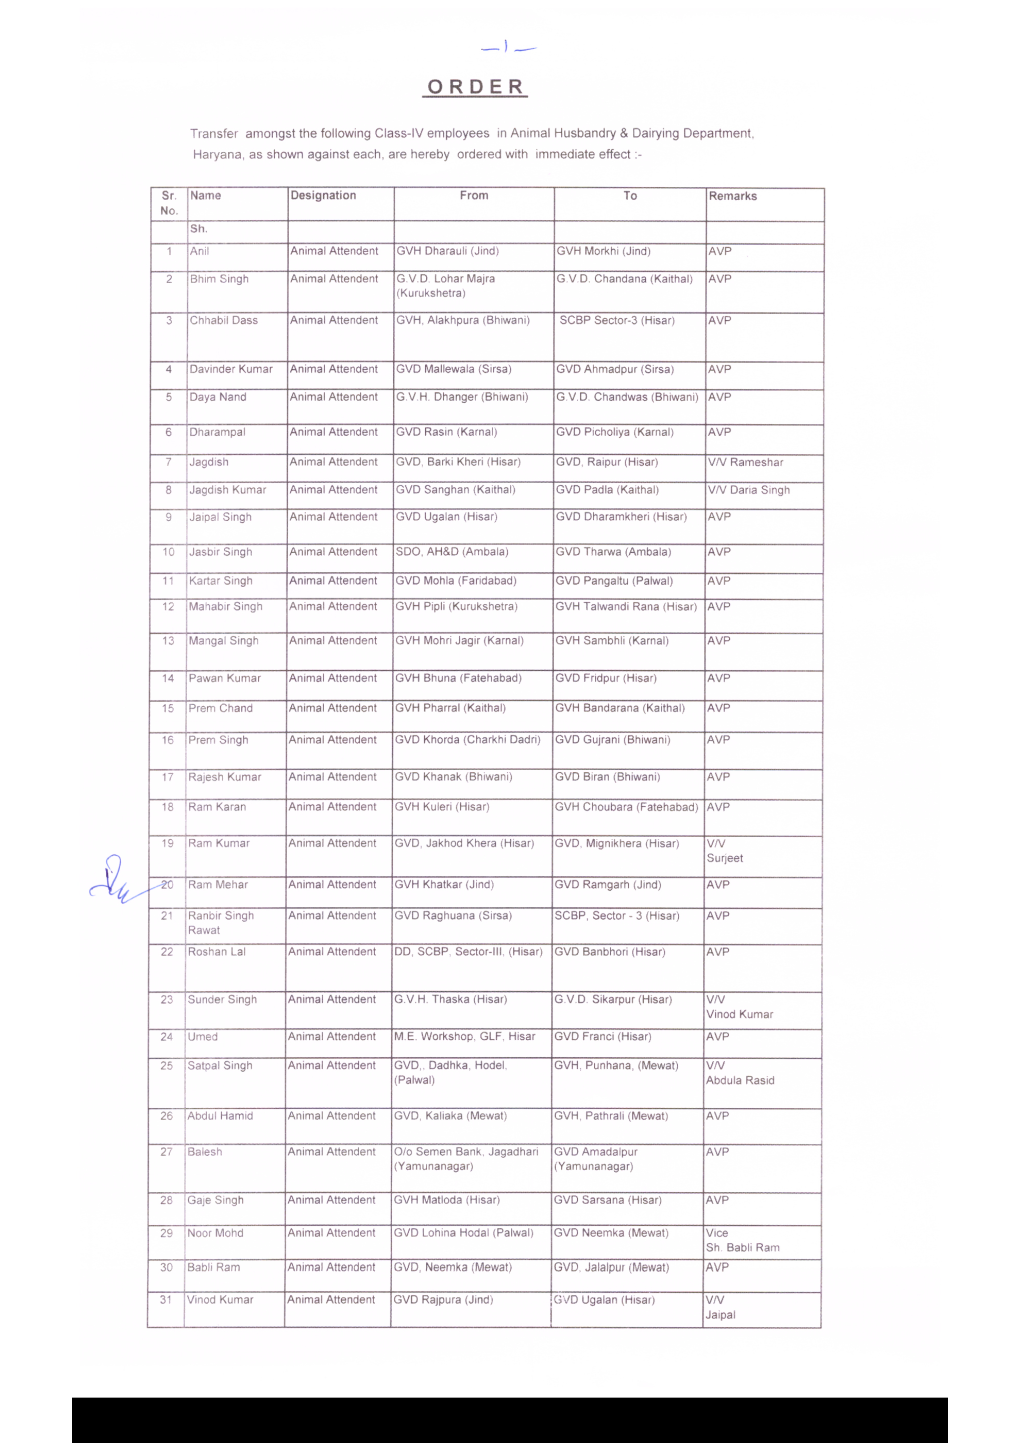 Transfer Order of Class IV Employees